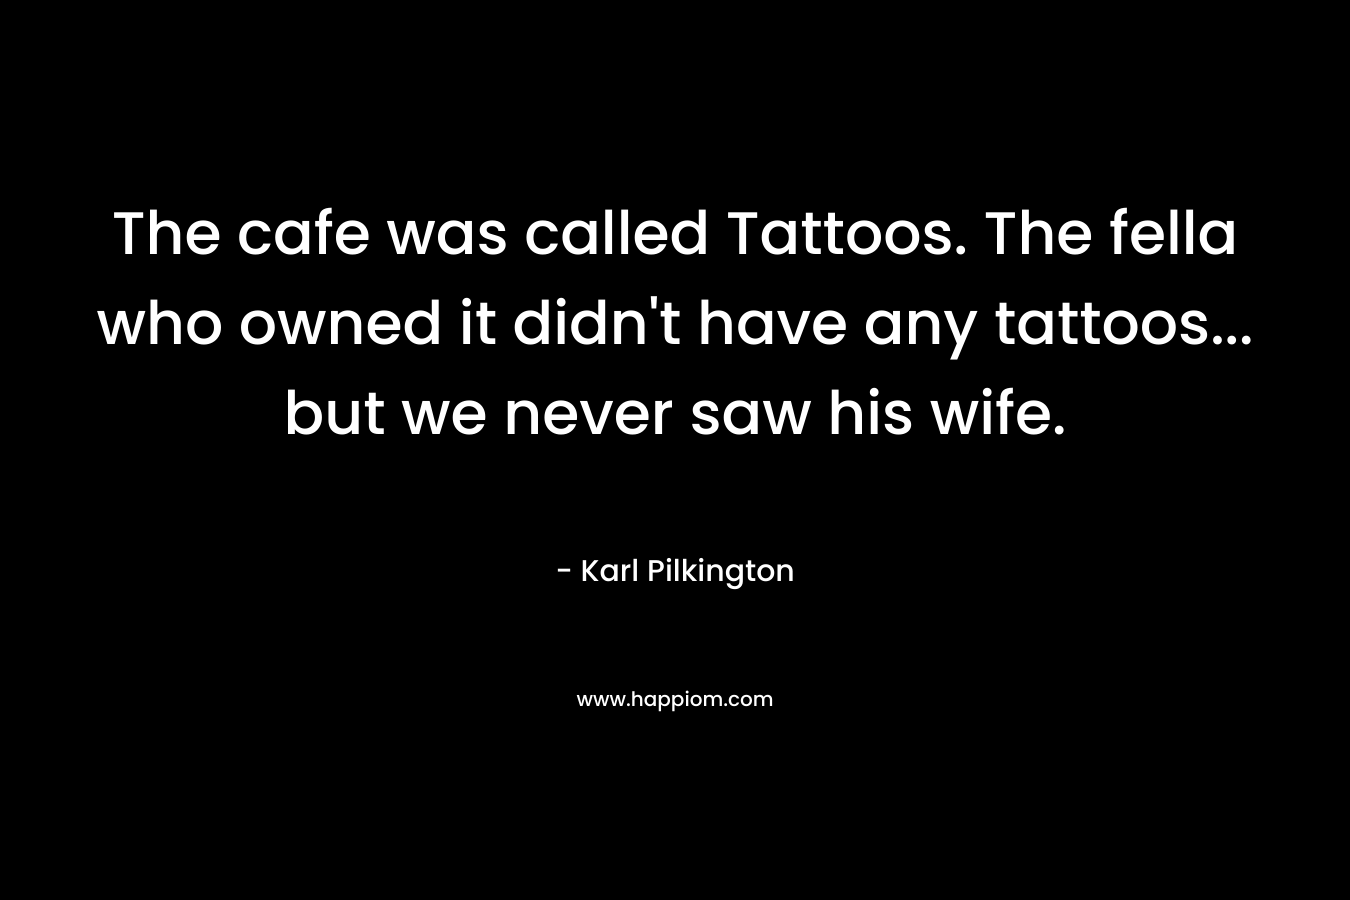 The cafe was called Tattoos. The fella who owned it didn’t have any tattoos… but we never saw his wife. – Karl Pilkington